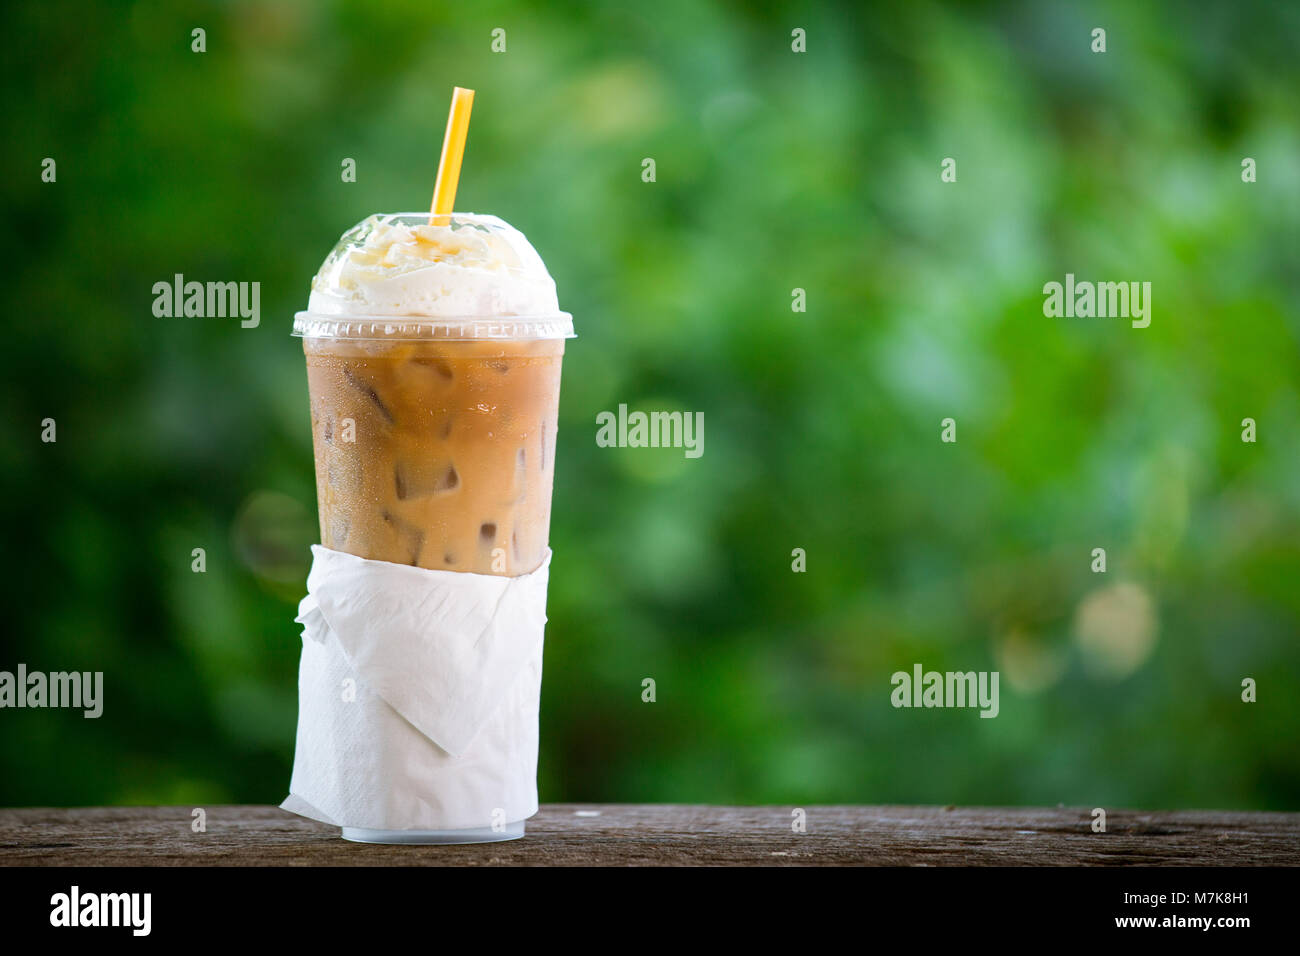 https://c8.alamy.com/comp/M7K8H1/iced-coffee-with-whipped-cream-in-plastic-cup-on-the-garden-table-M7K8H1.jpg